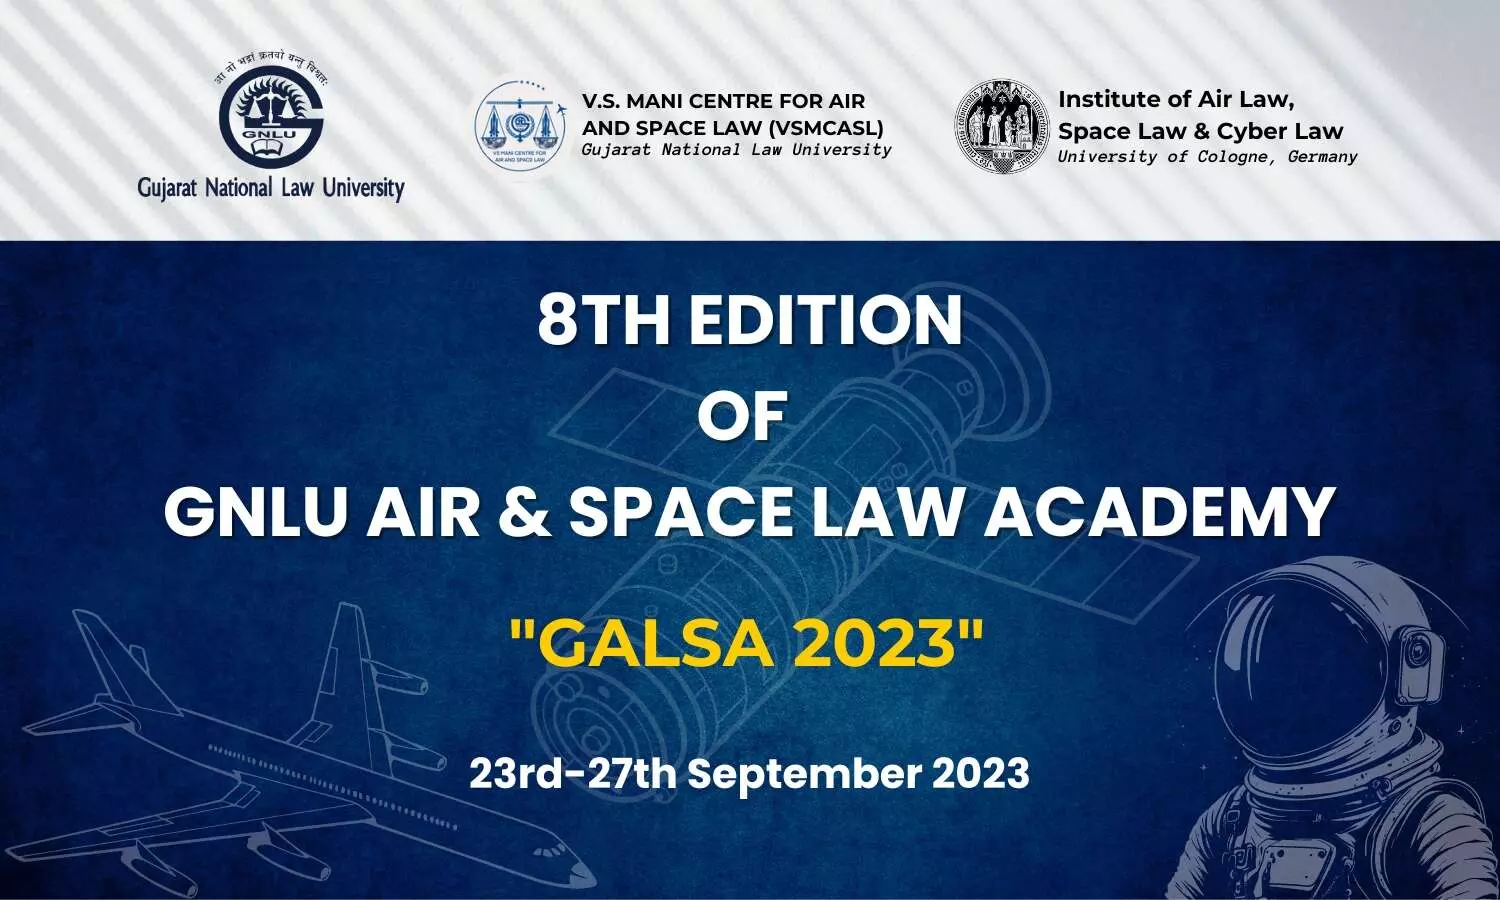 8th Edition of GNLU Air and Space Law Academy GALSA 2023